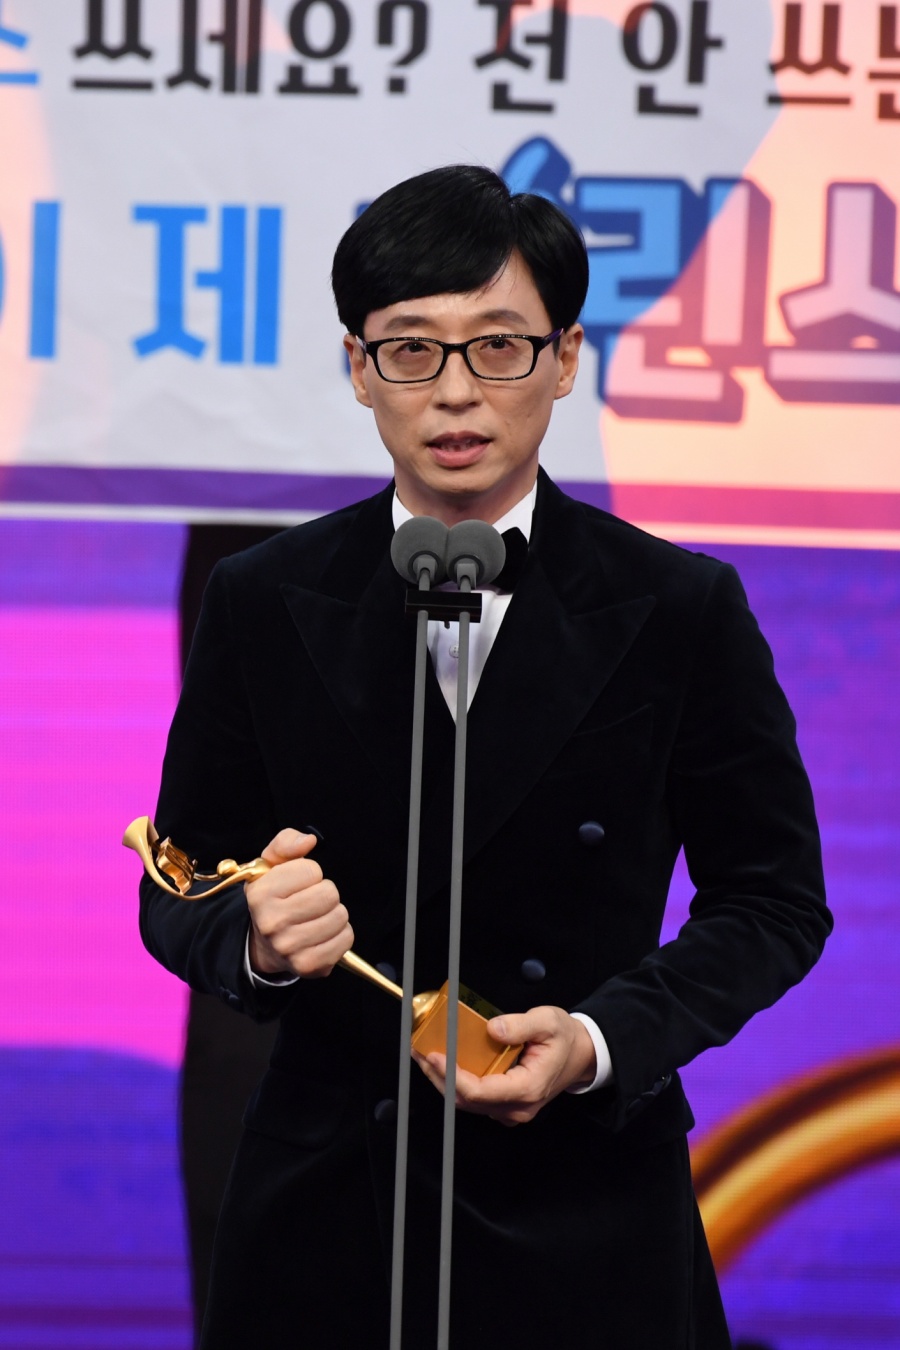 Broadcaster Yoo Jae-Suk became the main character of SBS Entertainment Grand Prize Grand prize in four years.Yoo Jae-Suk won the Grand Prize trophy with Running Man at 2019 SBS Entertainment Grand Prize held at SBS Prism Tower in Sangam-dong, Mapo-gu, Seoul on the 28th.Yoo Jae-Suk is a grand prize including Maman Square, Baek Jong-wons Alley Restaurant, Dongsangmong - You Are My Destiny Gim Gu-ra, Ugly Our Little Seo Jang-hoon, Shin Dong-yeop, Kim Jong-kook, Jungles Law Kim Byung-man He was called Grand Prize over the candidates.It is only four years since 2015 that Yoo Jae-Suk won the Grand Prize at SBS Entertainment Grand Prize.Yoo Jae-Suk said, It is true that variety is getting lost in the entertainment side these days.Nevertheless, I am grateful to the many crew members and members who have been together with us, and the many guests who have been together with Running Man. It is also true that we have homework to meet 10 years next year.We will try to develop a lot of ourselves. He expressed his sense of responsibility for the longevity entertainment Running Man and the burden of change.He also mentioned the late Sulli and Goo Hara, who sadly passed away.Yoo Jae-Suk said, Of the guests who appeared in Running Man, Goo Hara and Sulli, who left for heaven this year, are very thoughtful.I wish you both would do what you want to do in heaven. I sincerely thank you both. Yoo Jae-Suk appeared on Running Man and commemorated the two who showed their energy-filled performance.Yoo Jae-Suk said, If you thought about whether there was something pleasant, something pleasant, or something happy before, I think that you are grateful for your comfortable day.I am grateful to many people who have such a comfortable life.  I will make such a program that many entertainers will be born next year by pioneering any other way or the way others do not go.I also want more entertainers to attend the Grand prize and enjoy this festival together. Baek Jong-won, who was nominated for the Grand Prize, won the Achievement Award.Baek Jong-won is said to have expressed his intention to refuse the Grand Prize as well as the Grand Prize candidate before the Grand Prize.Baek Jong-won said in an interview for Grand Prize candidates: I am honored just to be a Grand Prize candidate.Entertainment Grand prize is received by entertainers who have worked hard for a year, and I am not an entertainer. He declared that he would not accept the Grand prize.Like a strong will to reject the award, the award given to Baek Jong-won was an Achievement Award, not a Grand Prize.I dont know if I deserve it, said Baek Jong-won.I will work harder and narrowly to SBS, and I will do what I can to give energy to viewers and the people.  I get great energy and more careful and powerful because of those who come to the shop or rest area that appeared on the broadcast and line up and eat delicious meals.I will work hard to reach my strength. Gim Gu-ra, a Grand Prize candidate, has a powerful blow towards terrestrial broadcasting, with Gim Gu-ra saying: I wonder if its time for Entertainment Grand Prize to also be watered.KBS also has no ratings. Since there are many national pros who are five and 10 years old, they are receiving awards in a way that prevents them from returning.You can no longer pick eight Grand Prize candidates and spend one to two hours on your personal plane without content.Its time to change, he said.Last year, Grand prize winner Lee Seung-gi won the Producer Award and Best Teamwork Award.Yang Se-hyeong, who has been active in SBS signage entertainment such as All The Butlers and Mamans Square, won the SBS Honorary Temple Award and attracted attention.The following is the entire SBS Entertainment Grand Prize winner (played by the author).▲ Grand prize = Yoo Jae-Suk (Running Man)▲ New Men and Women Award = Choi Min-yong (Burning Youth), and Jeong In-sun (Baek Jong-wons Alley Restaurant)▲ Radio DJ Award = So Yi-hyun (the way home is So Yi-hyun), Bae Seong-jae (Ten of Bae Seong-jae)▲ Broadcast Writer Award = Wonjuwon (Choi Baek-hos Romantic Age), Park Eun-young (real-life entertainment midnight), Kim Mi-kyung (Dongsangmong - you are my destiny)▲ Best Couple Award = Tak Jae-hoon, Lee Sang-min (Ugly Our Little)▲ SBS Challenger = Huh Jae (Jungles Law), Lee Tae-gon (Jungles Law), Kim Dong-joon (Matnams Square)▲ SBS Family Award = Lee Yoon-ji (Sangmangmong - You are My Destiny)▲ SBS Honor Temple Award = Yang Se-hyeong (All The Butlers Integrated, Tastmans Square)▲ SBS Entertainer Award = Haha (Running Man)▲ Global Program Award = Running Man▲ Best Teamwork Award = All The Butlers Integrated▲ SNS Star Award = Gangnam (Dongsangmong - You are my destiny), Lee Sanghwa (Dongsangmong - You are my destiny), Lee Kwang-soo (Running Man), Park Na-rae (Little Forest), and Yoo Sung-jae (All The Butlers Integrated)▲ Excellence Program Award = Bronze Imong - You are my destiny, burning youth▲ Best Program Award = Baek Jong-wons Alley Restaurant▲ Excellence Prize = Kim Hee-cheol (Matnams Square), Yoon Sang-hyun (Dongsangmong - You Are My Destiny), Yang Se-chan (Running Man), and Lee Sang-yoon (All The Butlers Integrated)▲ Grand Prize = Hong Jin-young (Ugly Our Little Child), Kim Jong-kook (Ugly Our Little Child), Kim Sung-joo (Baek Jong-wons Alley Restaurant), Choi Sung-guk (Burning Youth)▲ Producer Award = Lee Seung-gi (All The Butlers Integrated)▲ Achievement Award = Baek Jong-won (Baek Jong-wons alley restaurant, Masannams square)=